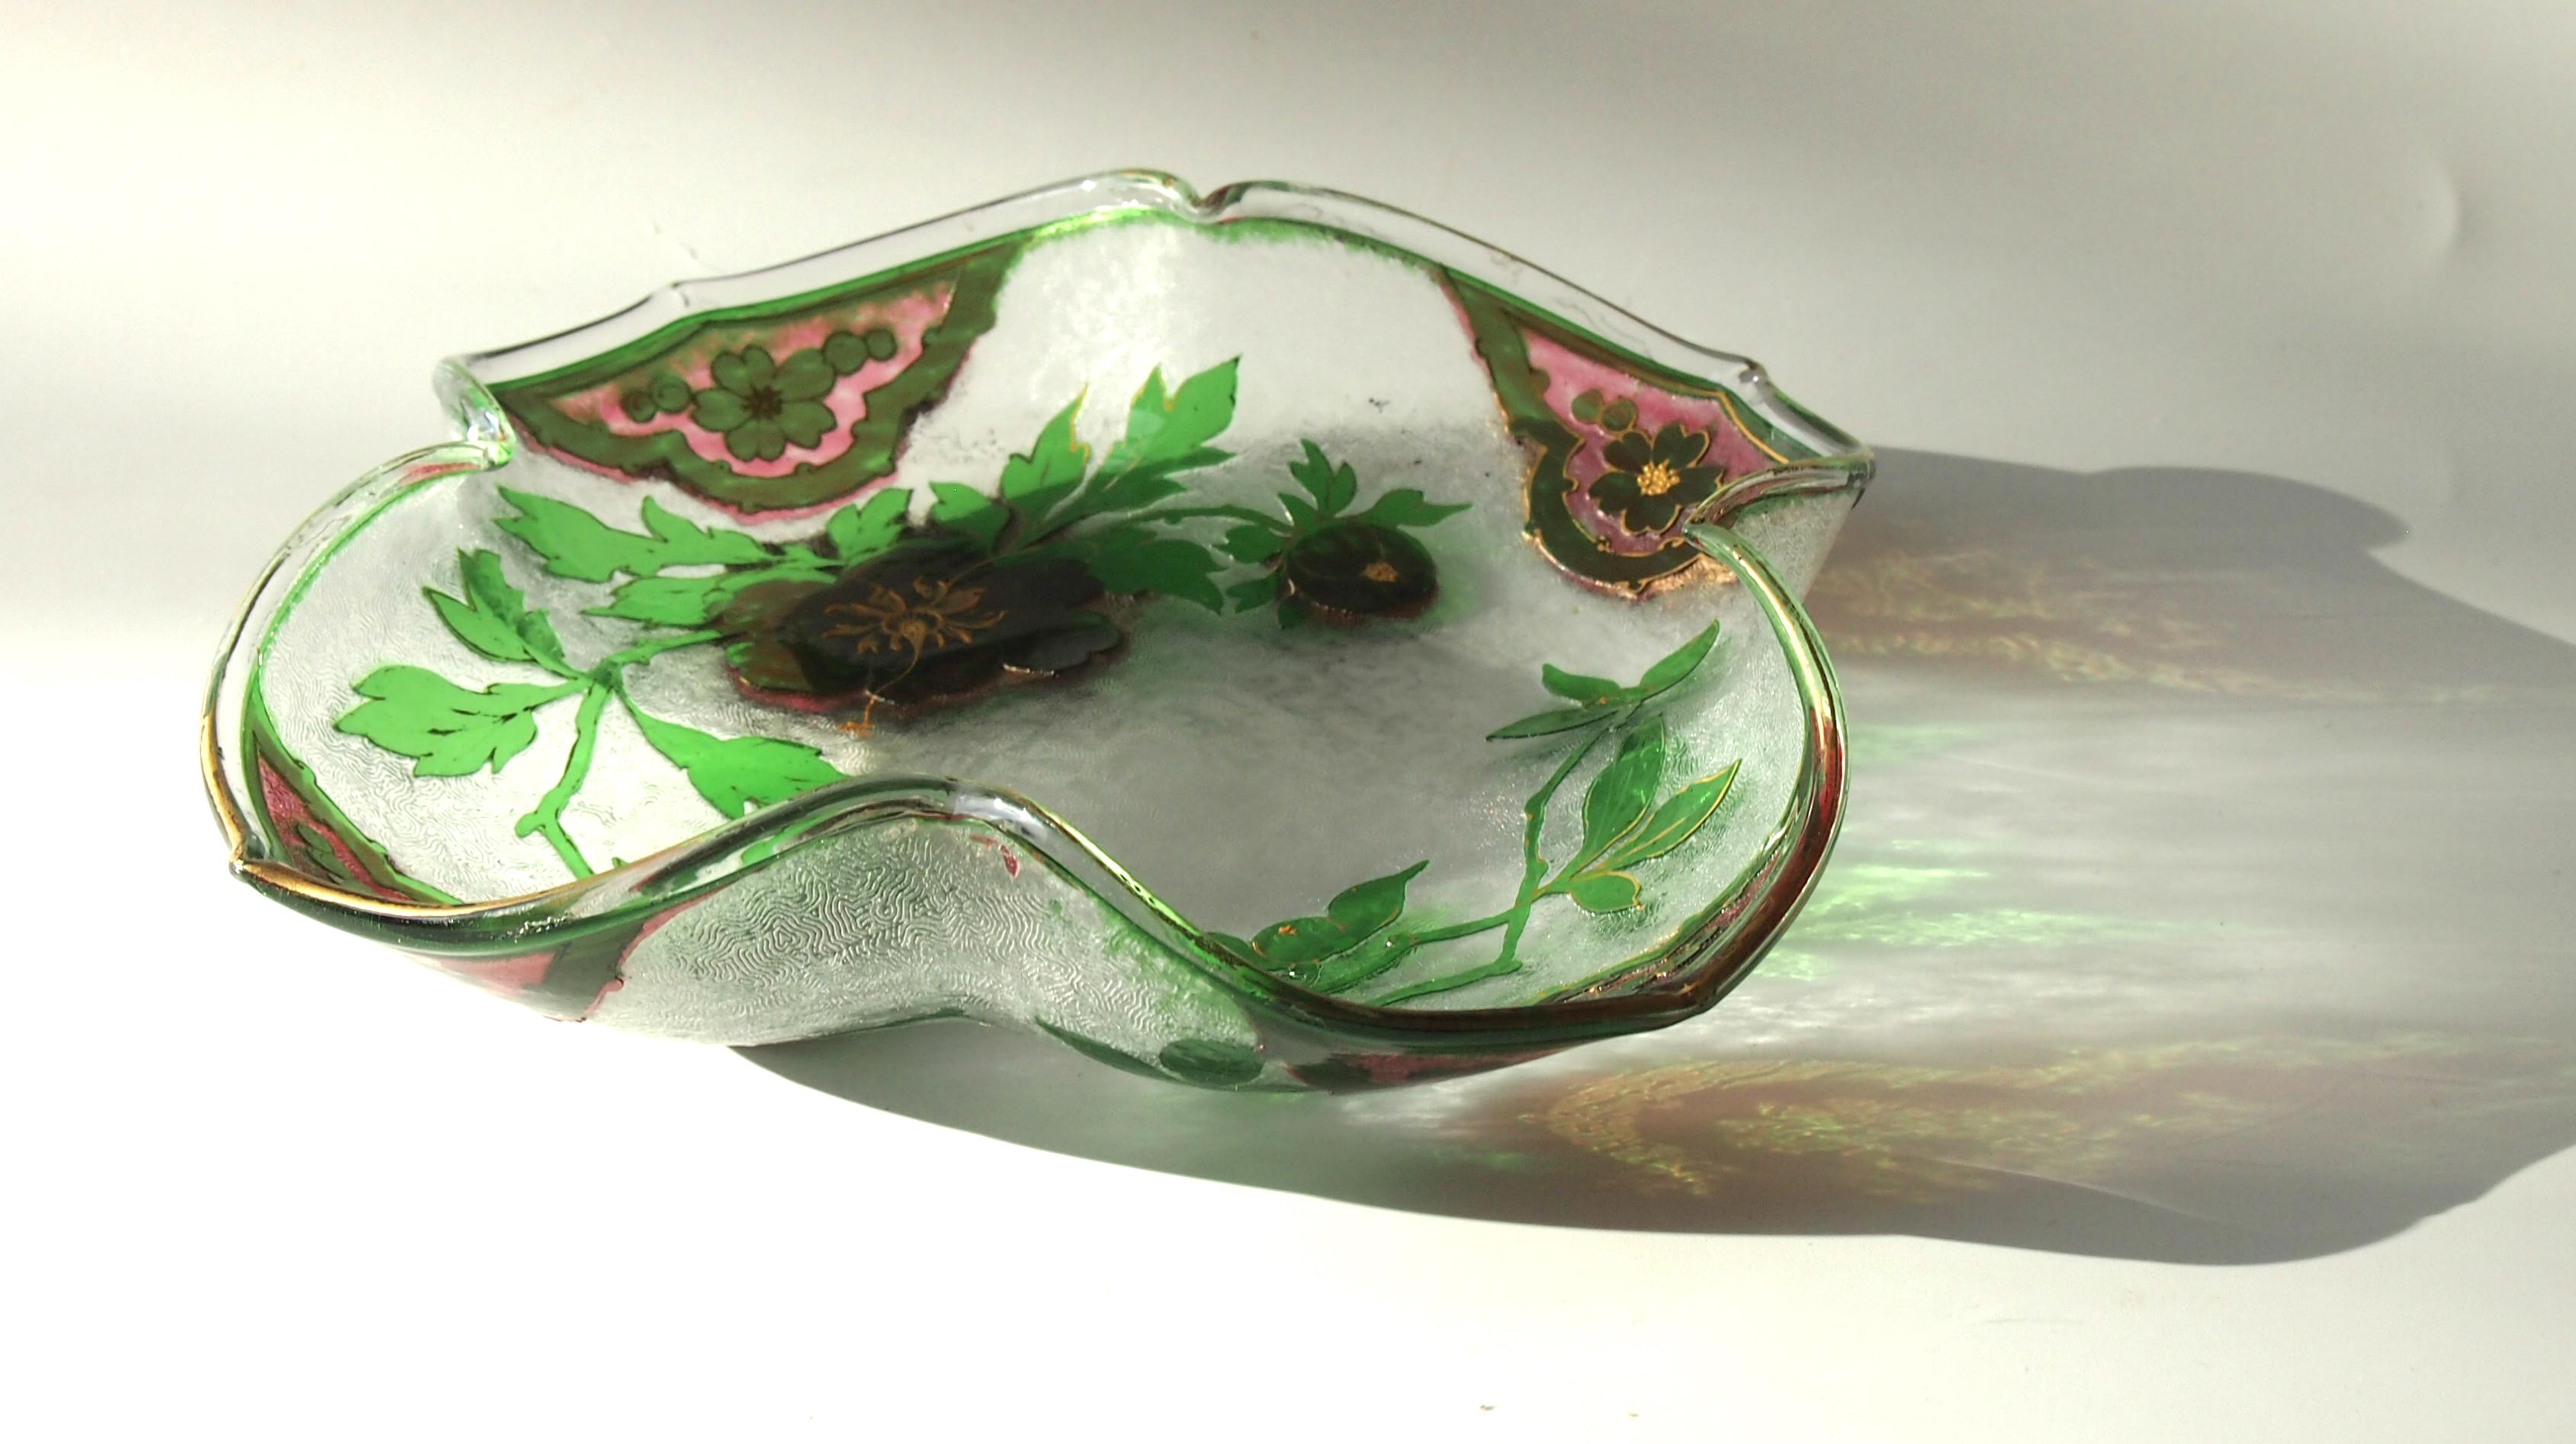 Superb Art Nouveau pink over green gilded Riedel cameo dish depicting stylized flowers. We've seen a number of these over the years with just one color, but this is the first we've seen with two colors. This range was first presented by Riedel at